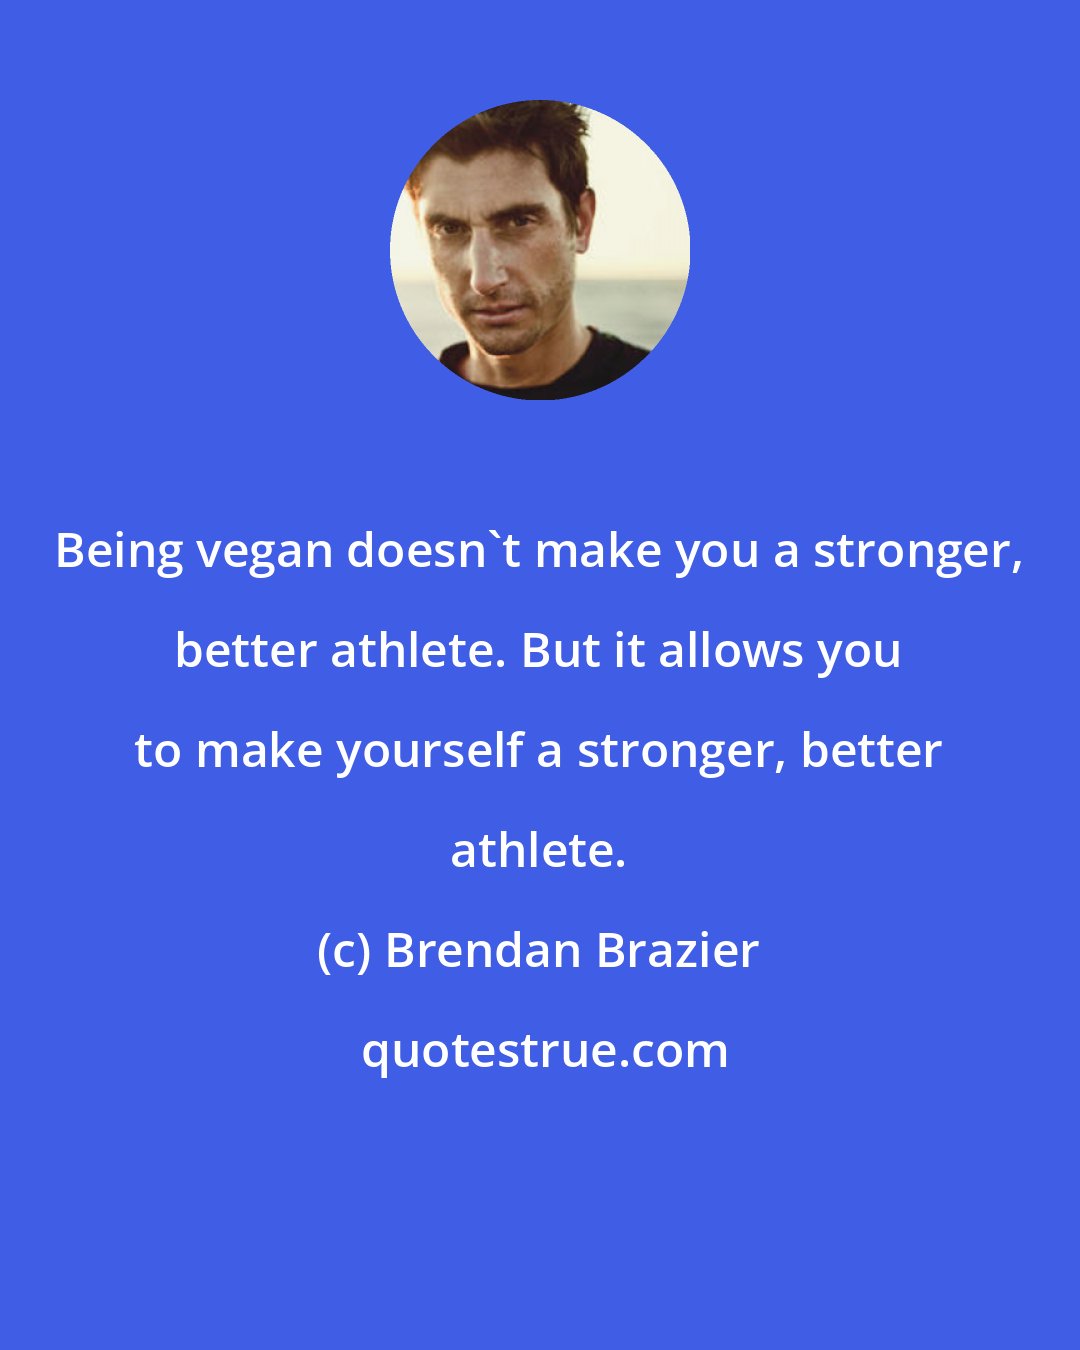 Brendan Brazier: Being vegan doesn't make you a stronger, better athlete. But it allows you to make yourself a stronger, better athlete.